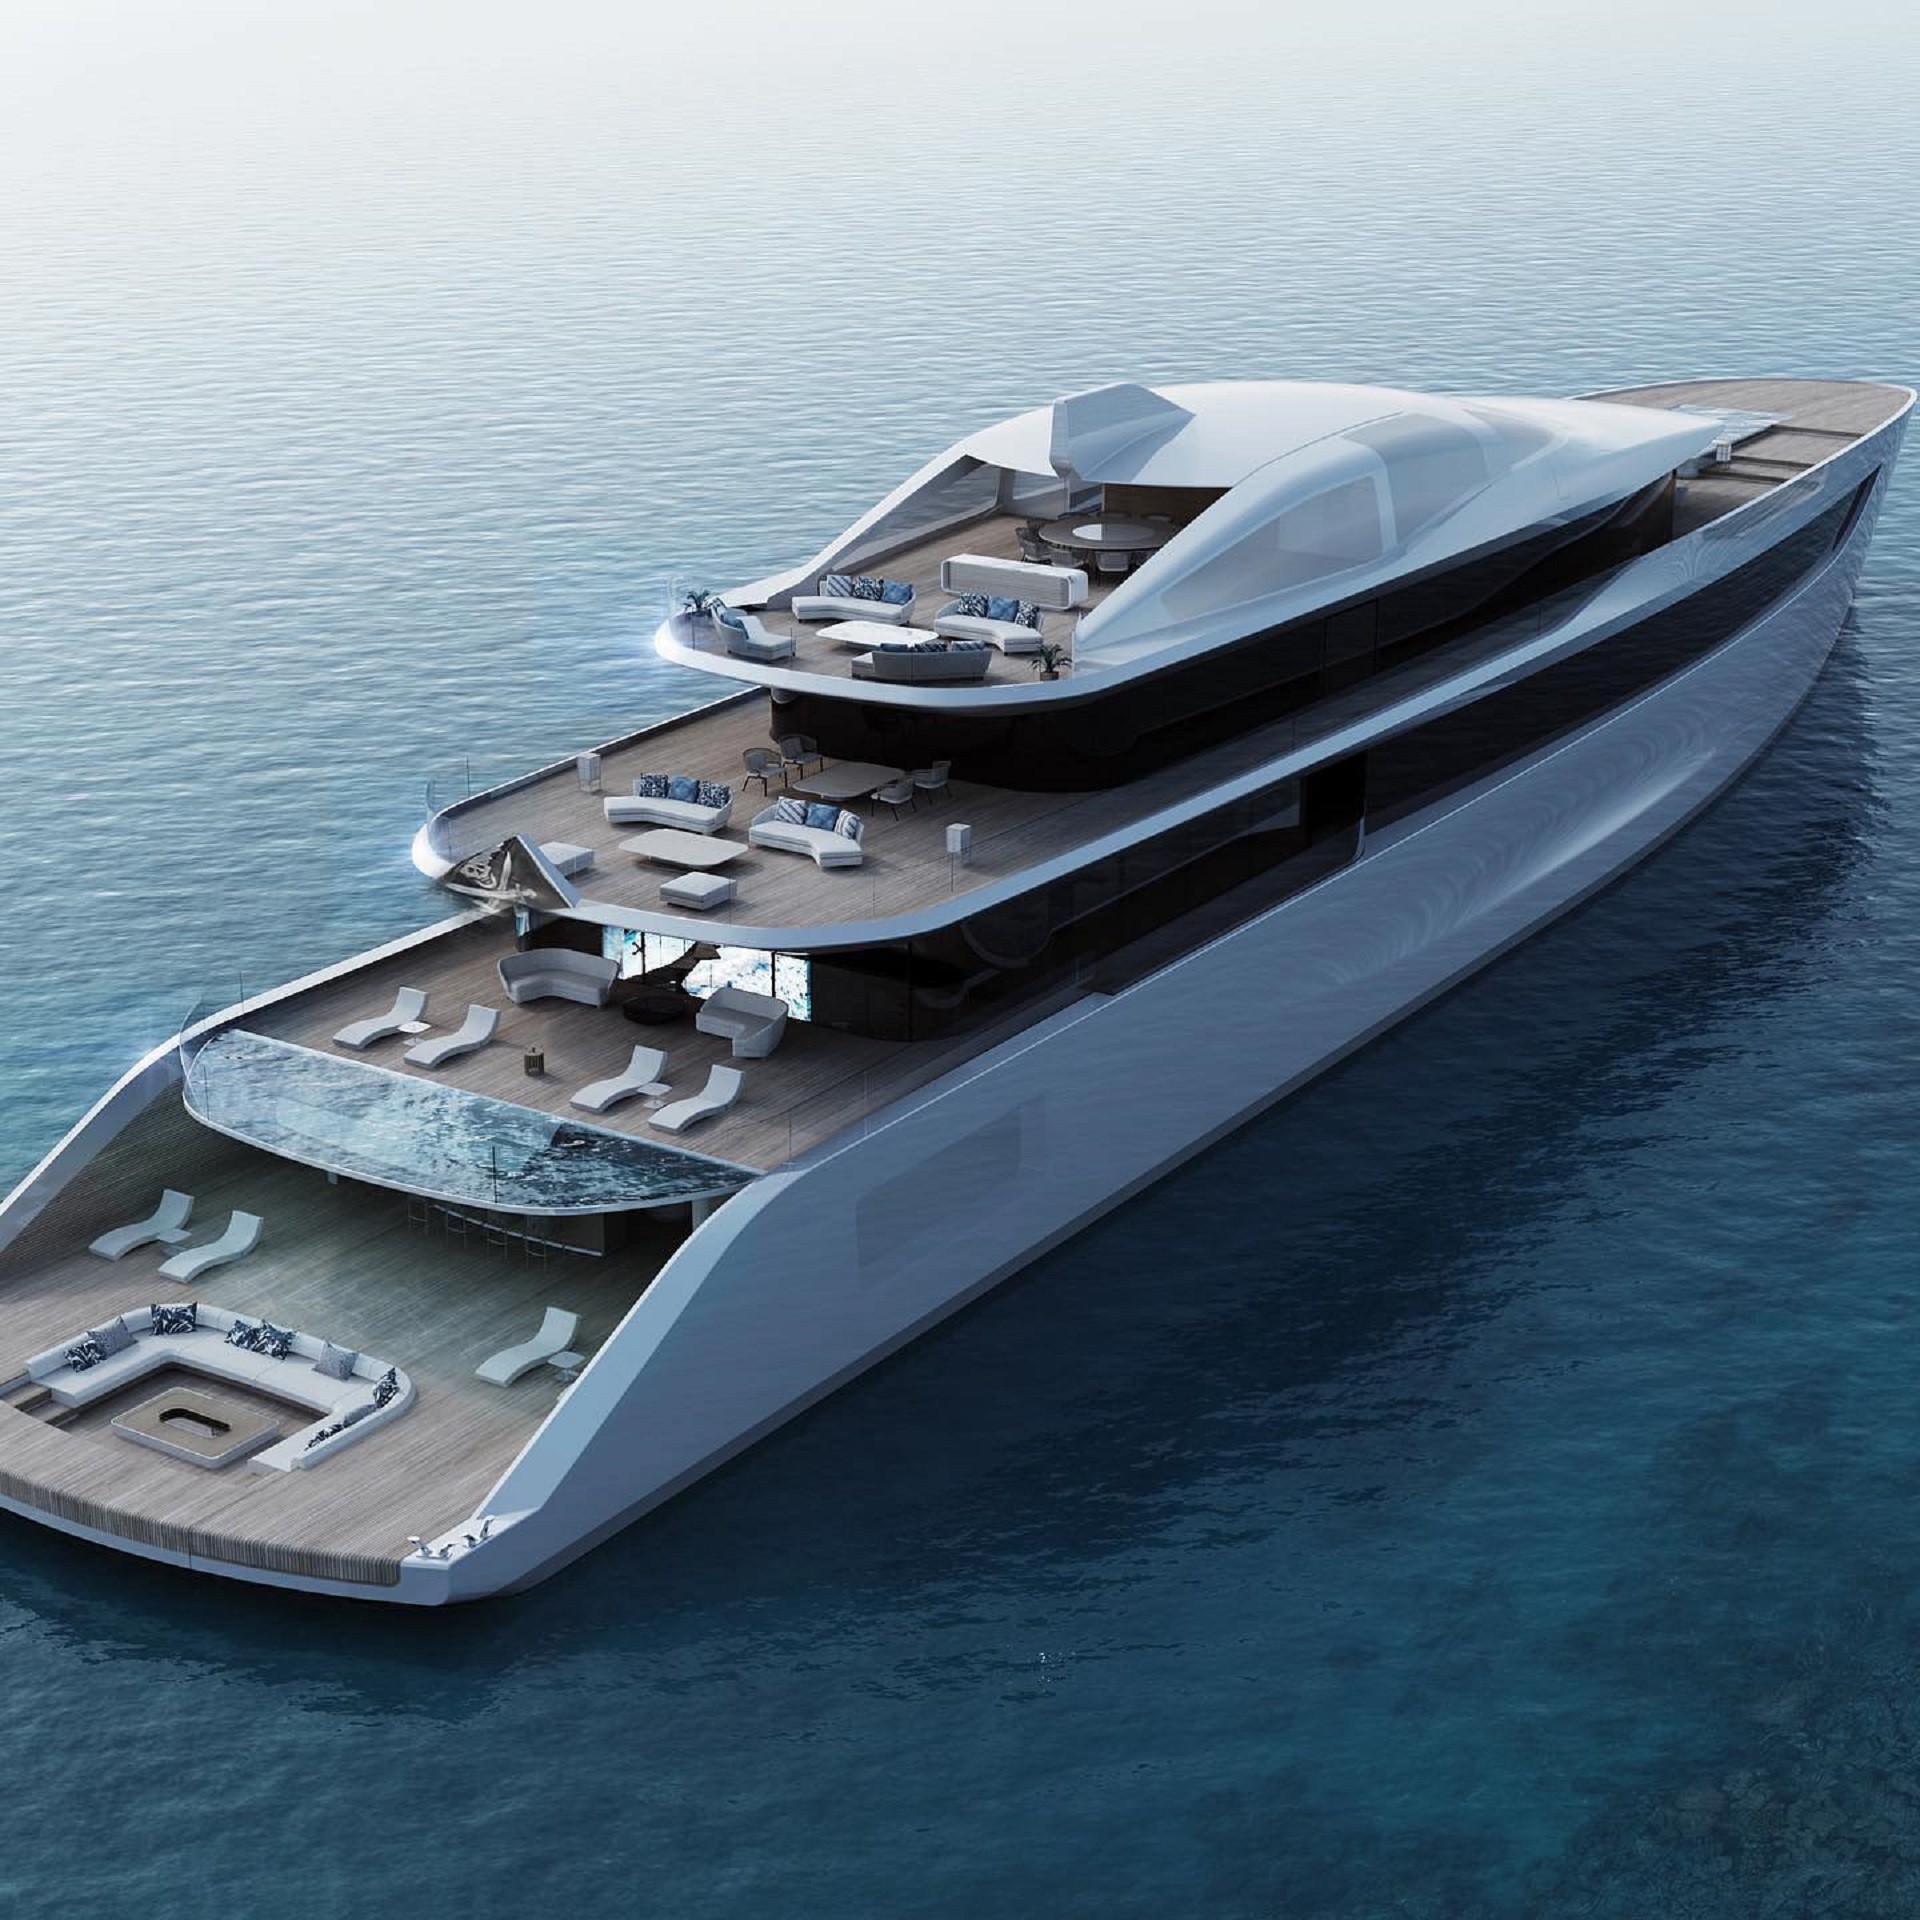 Dust Superyacht Is 272 Ft of Floating Zen, Has a 3,767 Sq. Ft. Beach ...